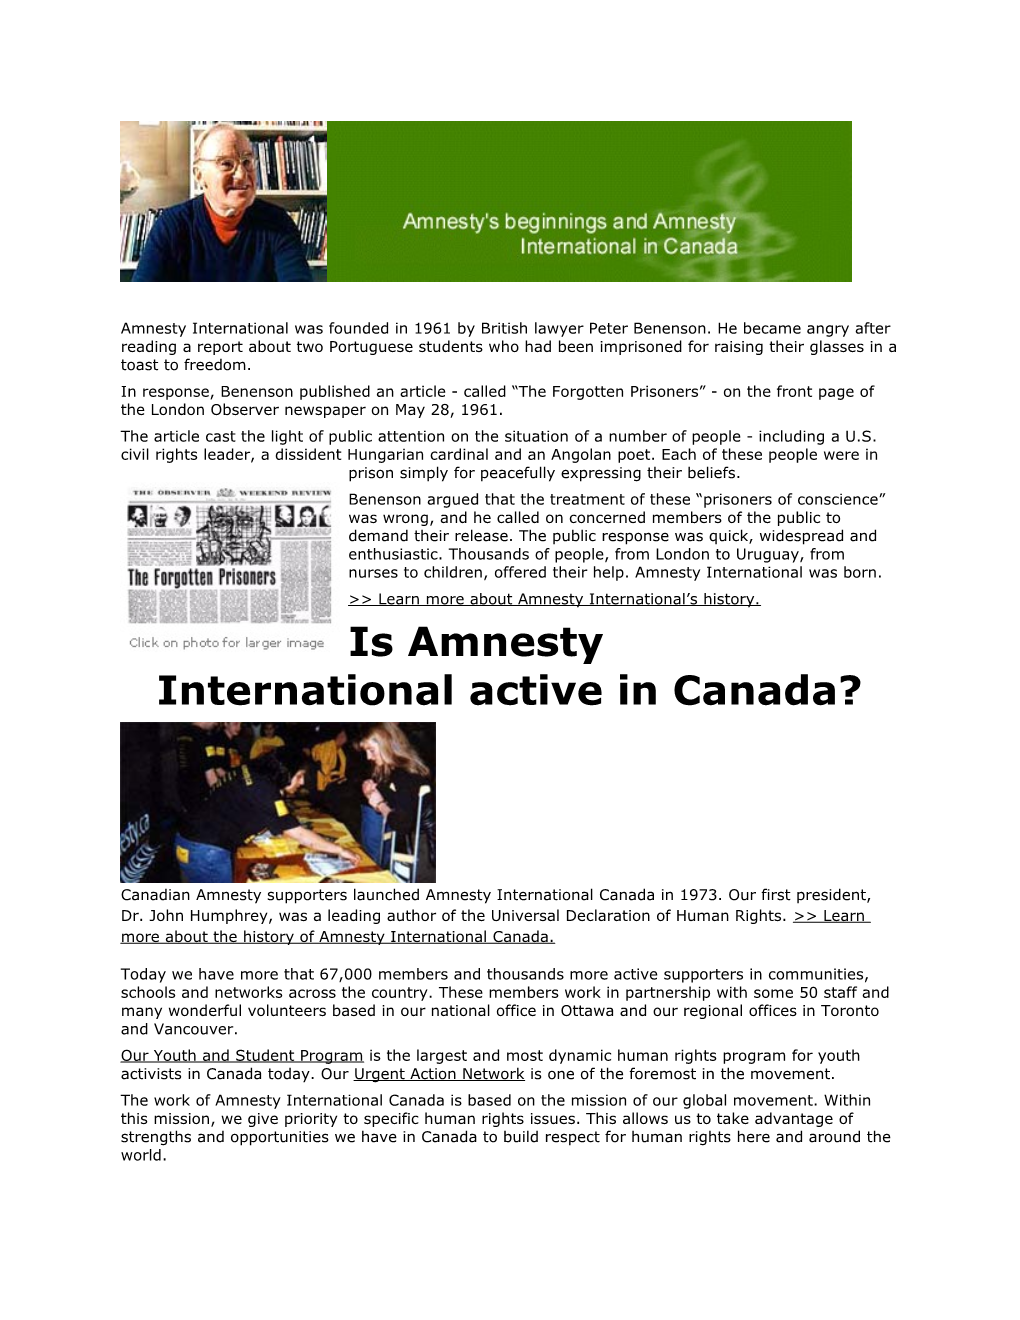 Is Amnesty International Active in Canada?